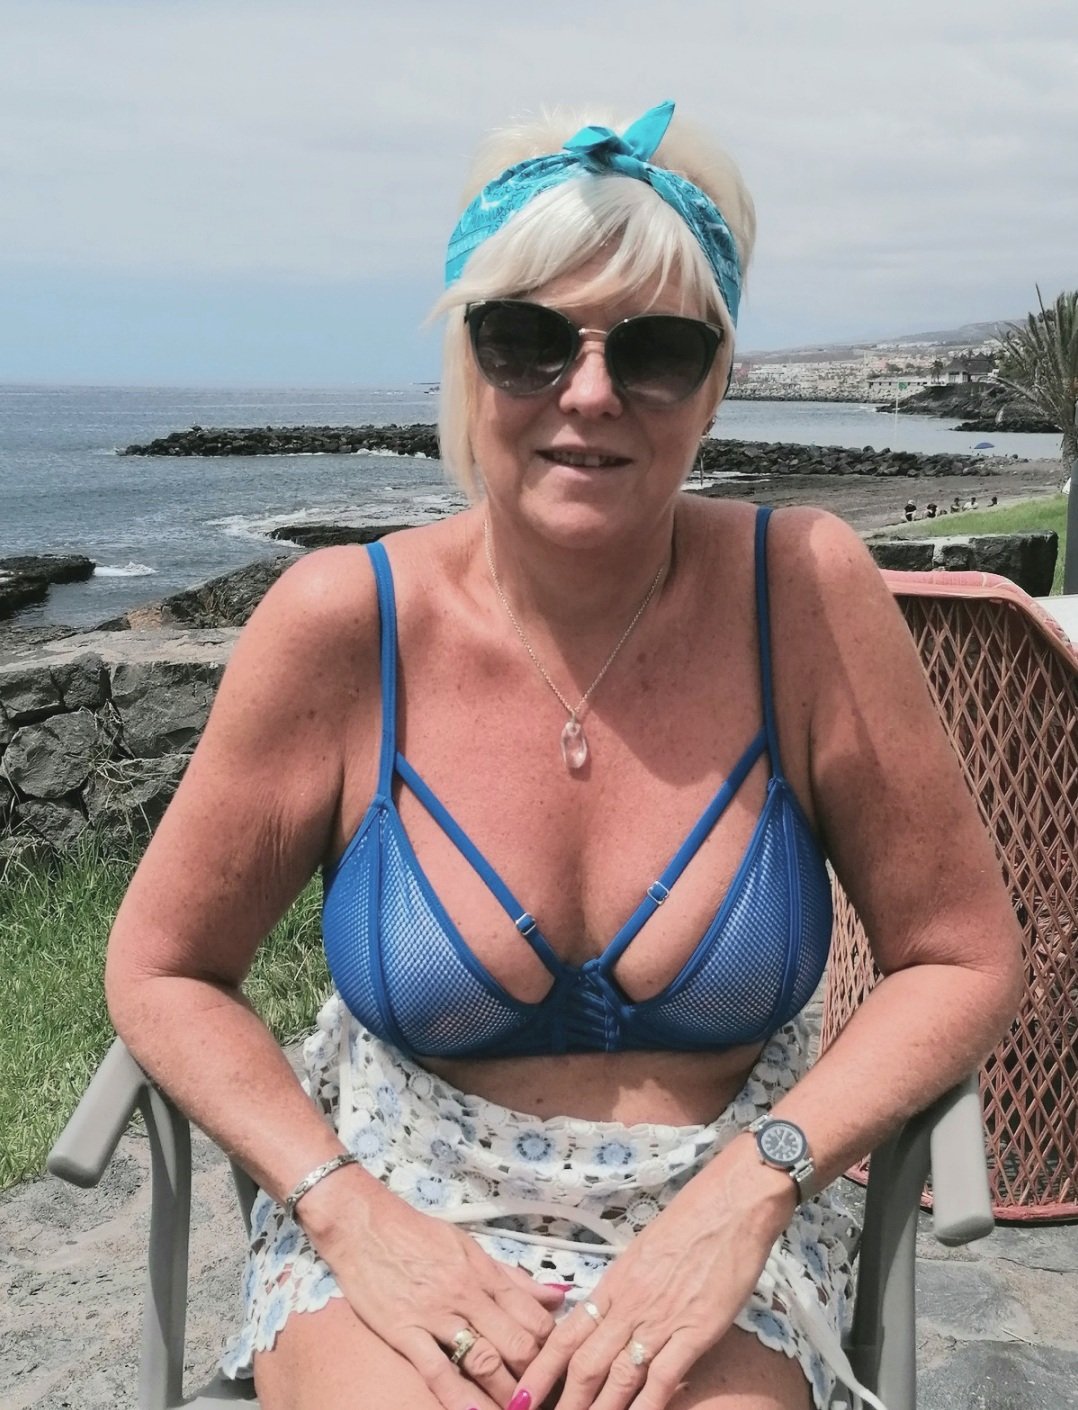 Mature Wives in Bikinis - Porn Videos and Photos picture